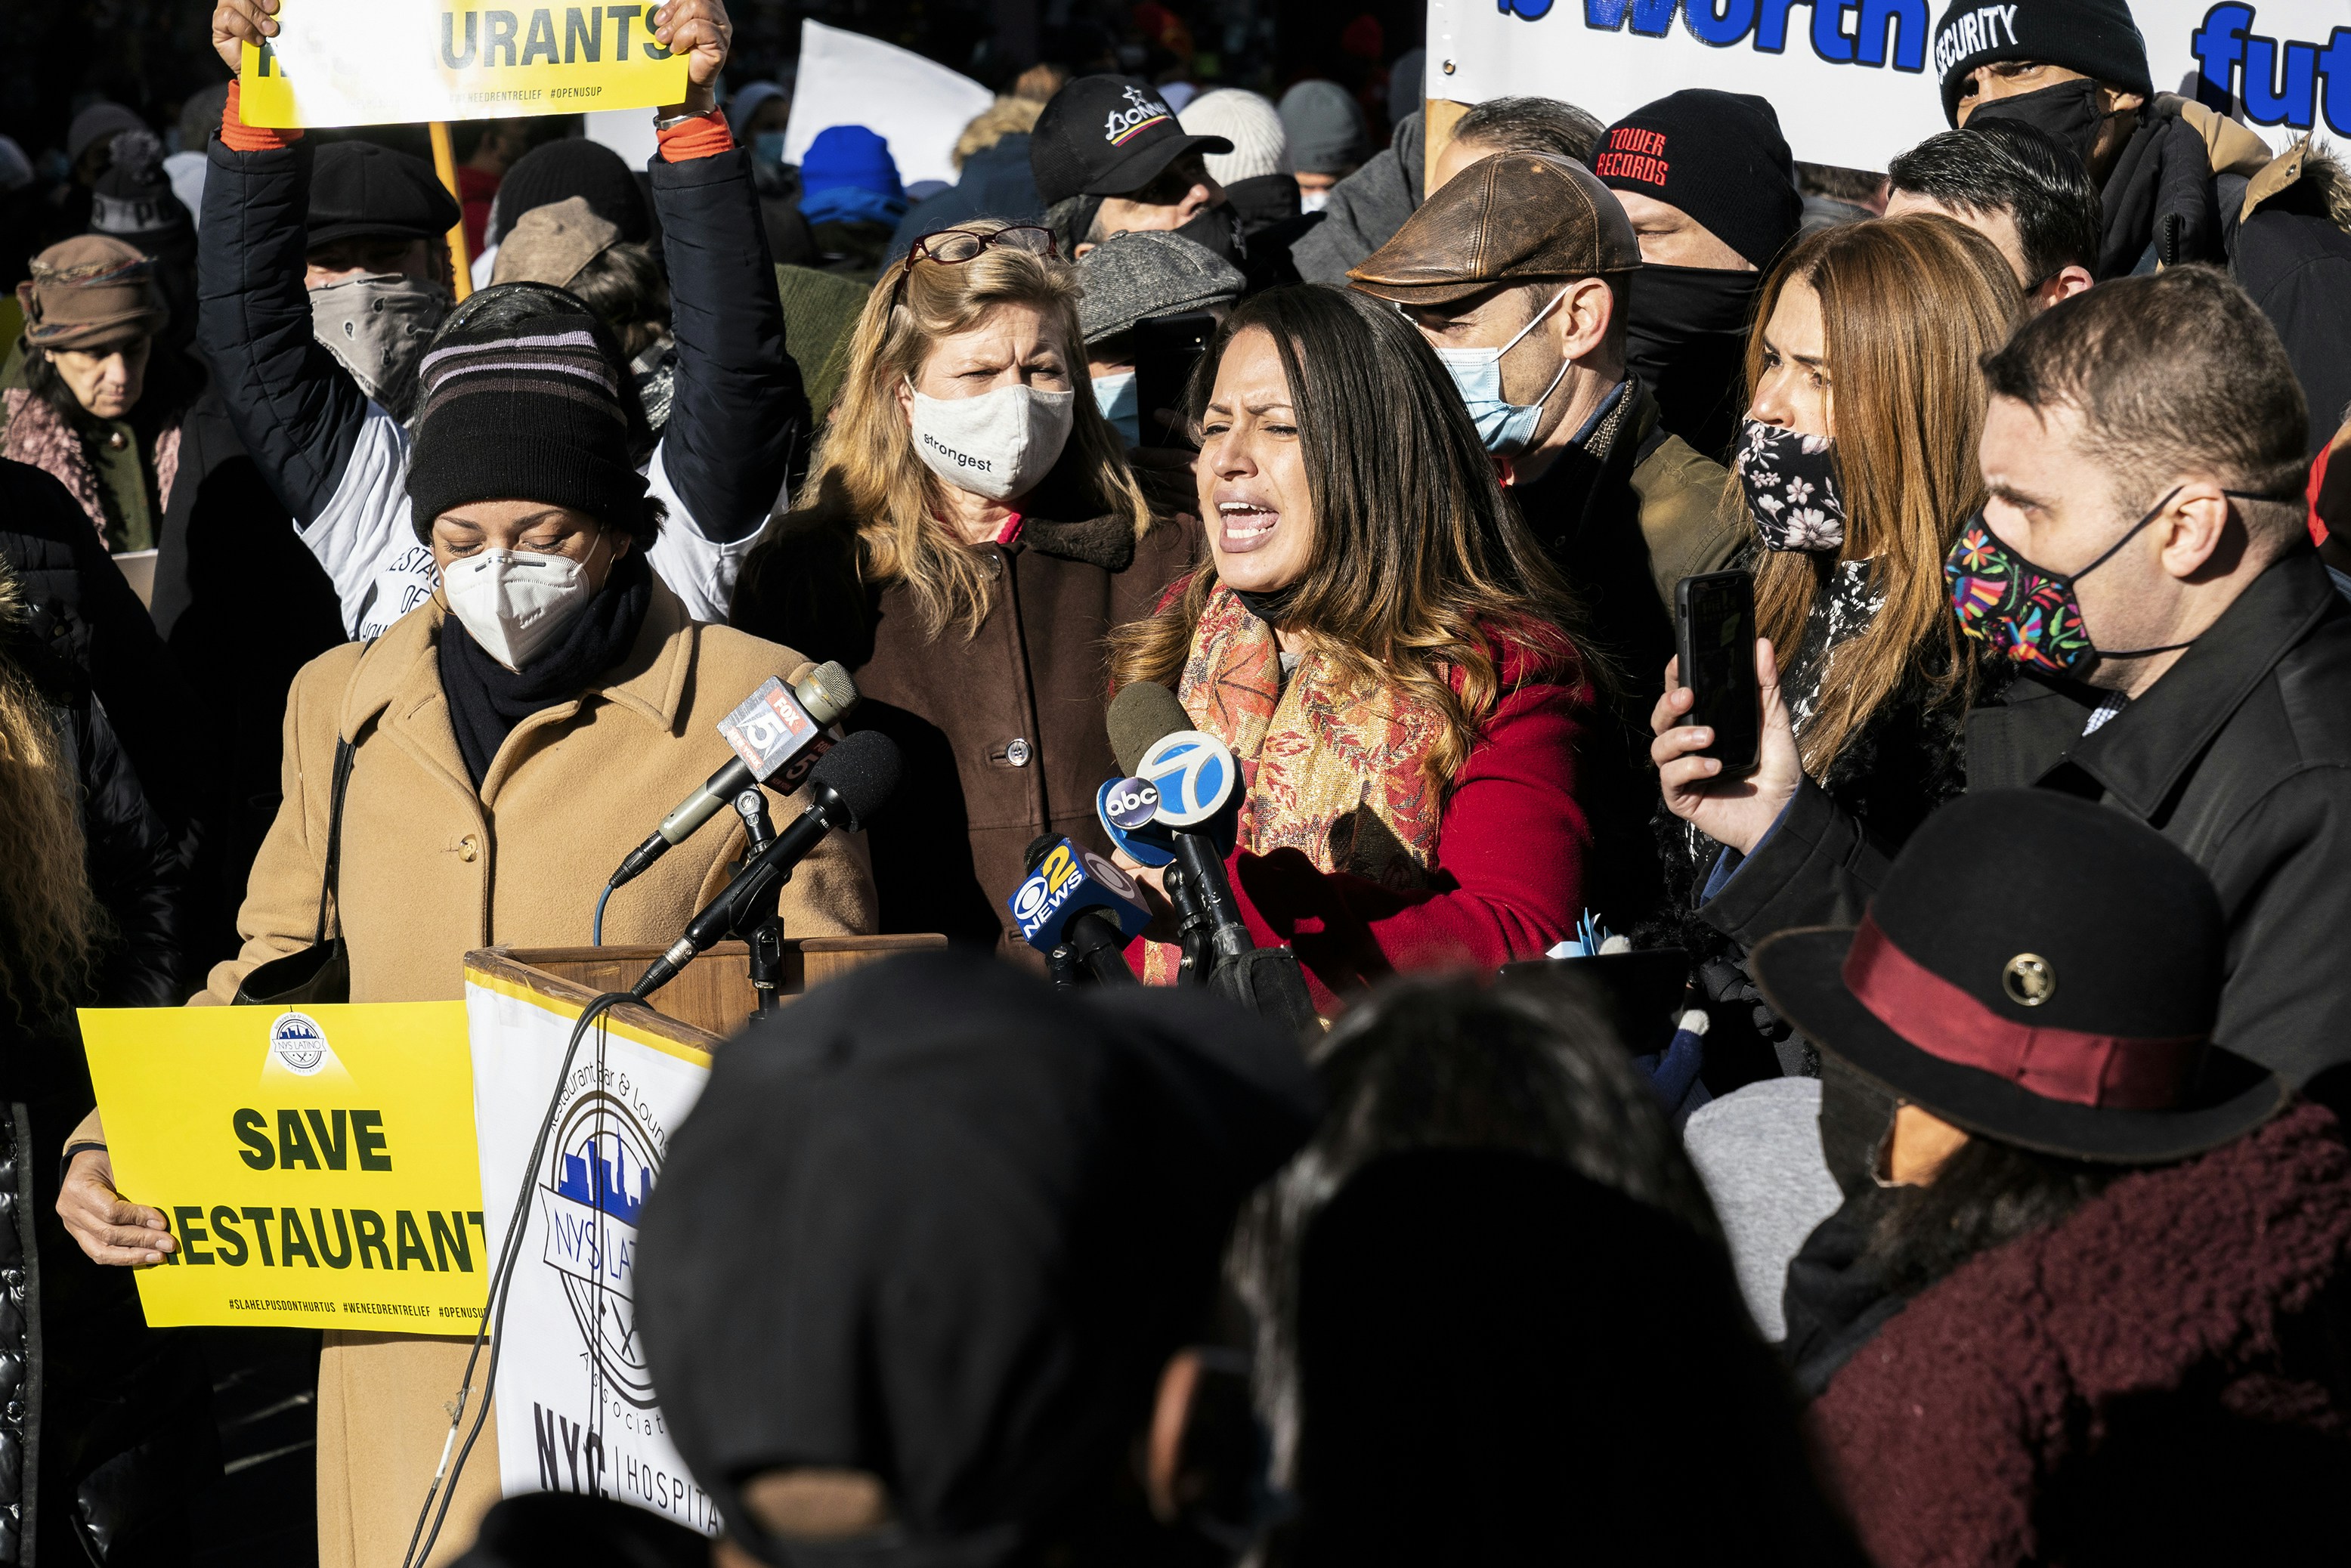 Assembly member Catalina Cruz speaks as hundreds of restaurant owners and workers rally in Times Square in New York on December 15, 2020 to protest Governor Andrew Cuomo's closure of indoor dining and demand a bailout that'll save their livelihoods. (Photo by Lev Radin/Sipa USA)(Sipa via AP Images)